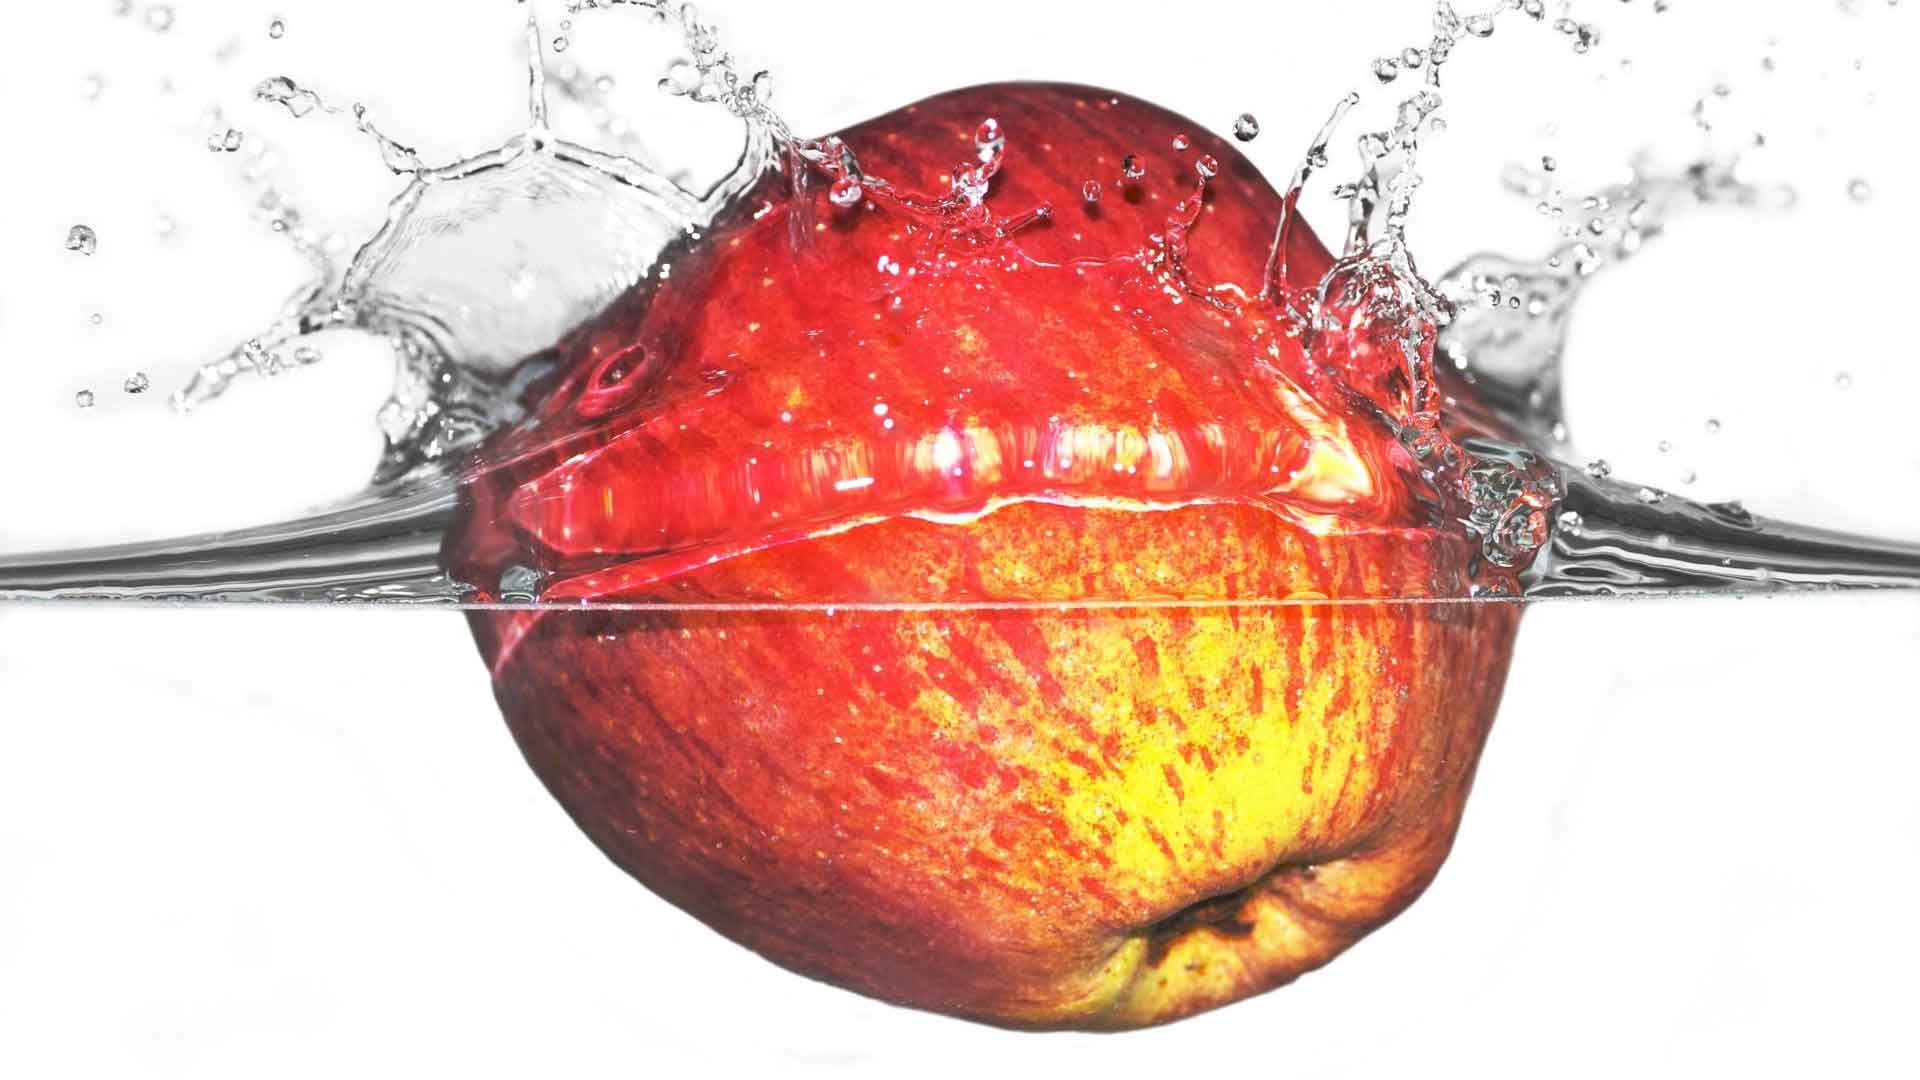 1920x1080 Fruits Slow Motion Splashes Apples Wallpapers HD Nature Green